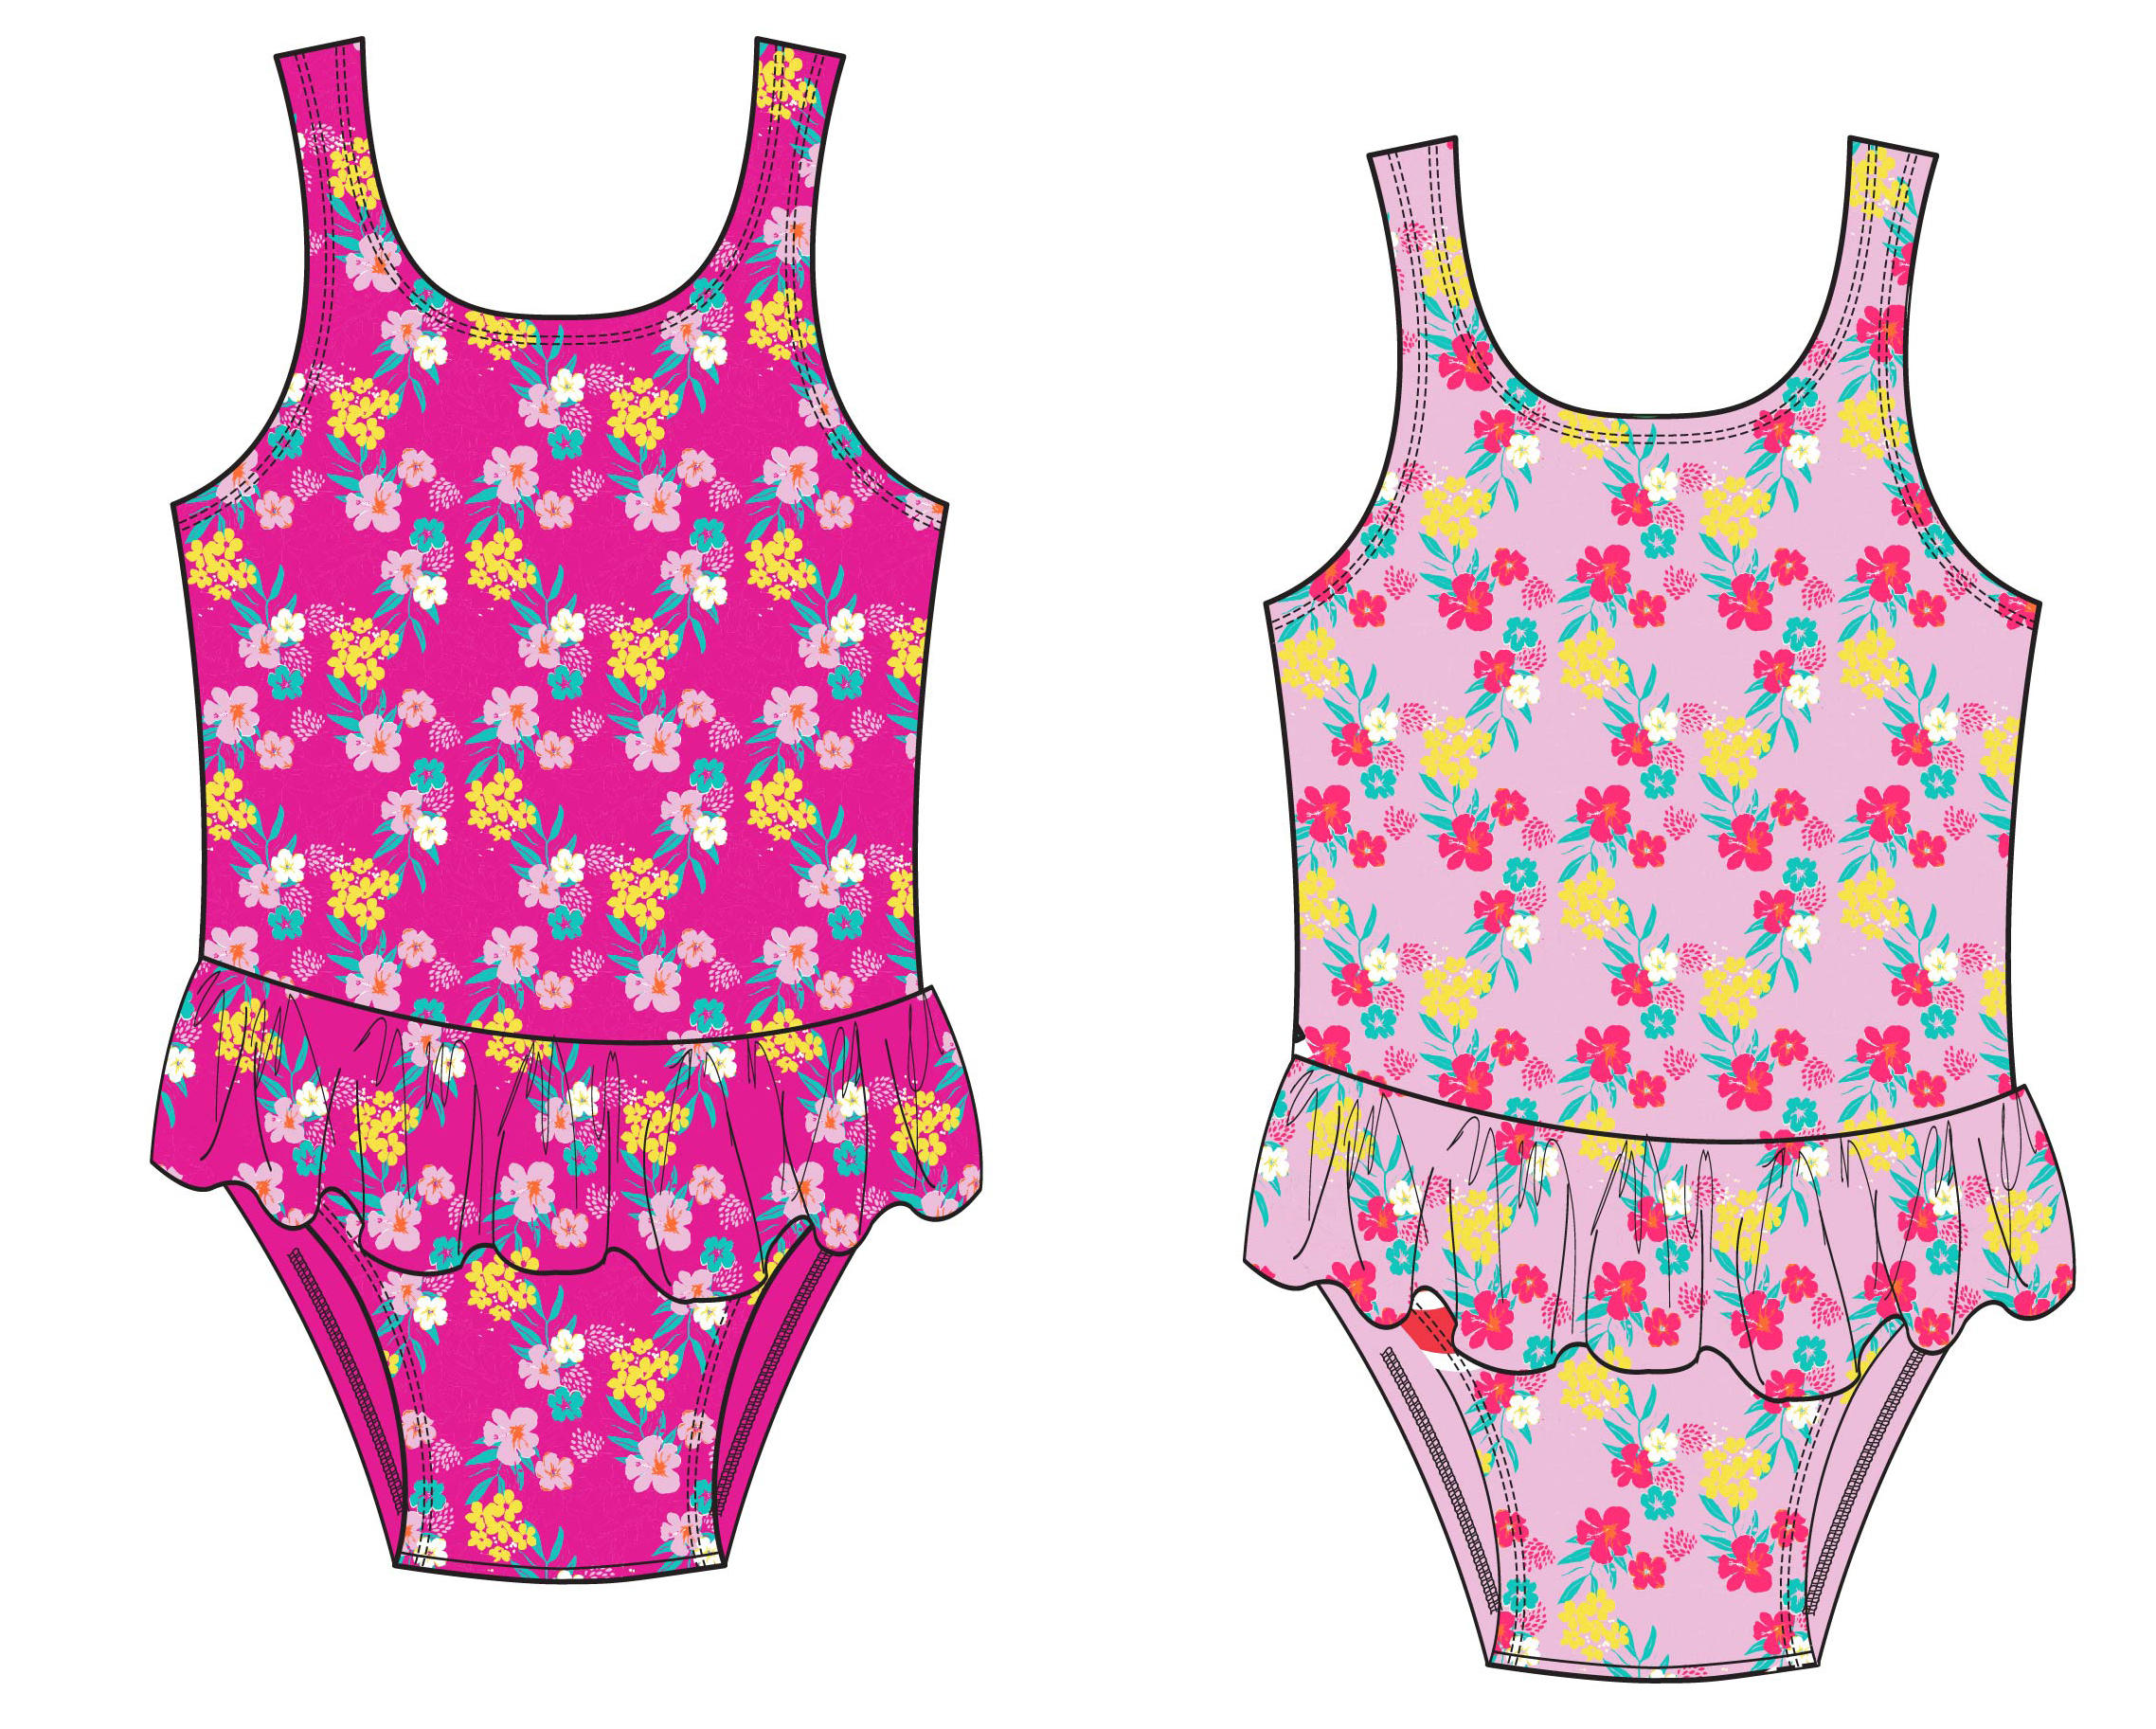 Girl's One-Piece Printed Swimsuits w/ Ruffle SKIRT - Hibiscus Floral Print - Sizes 5-7